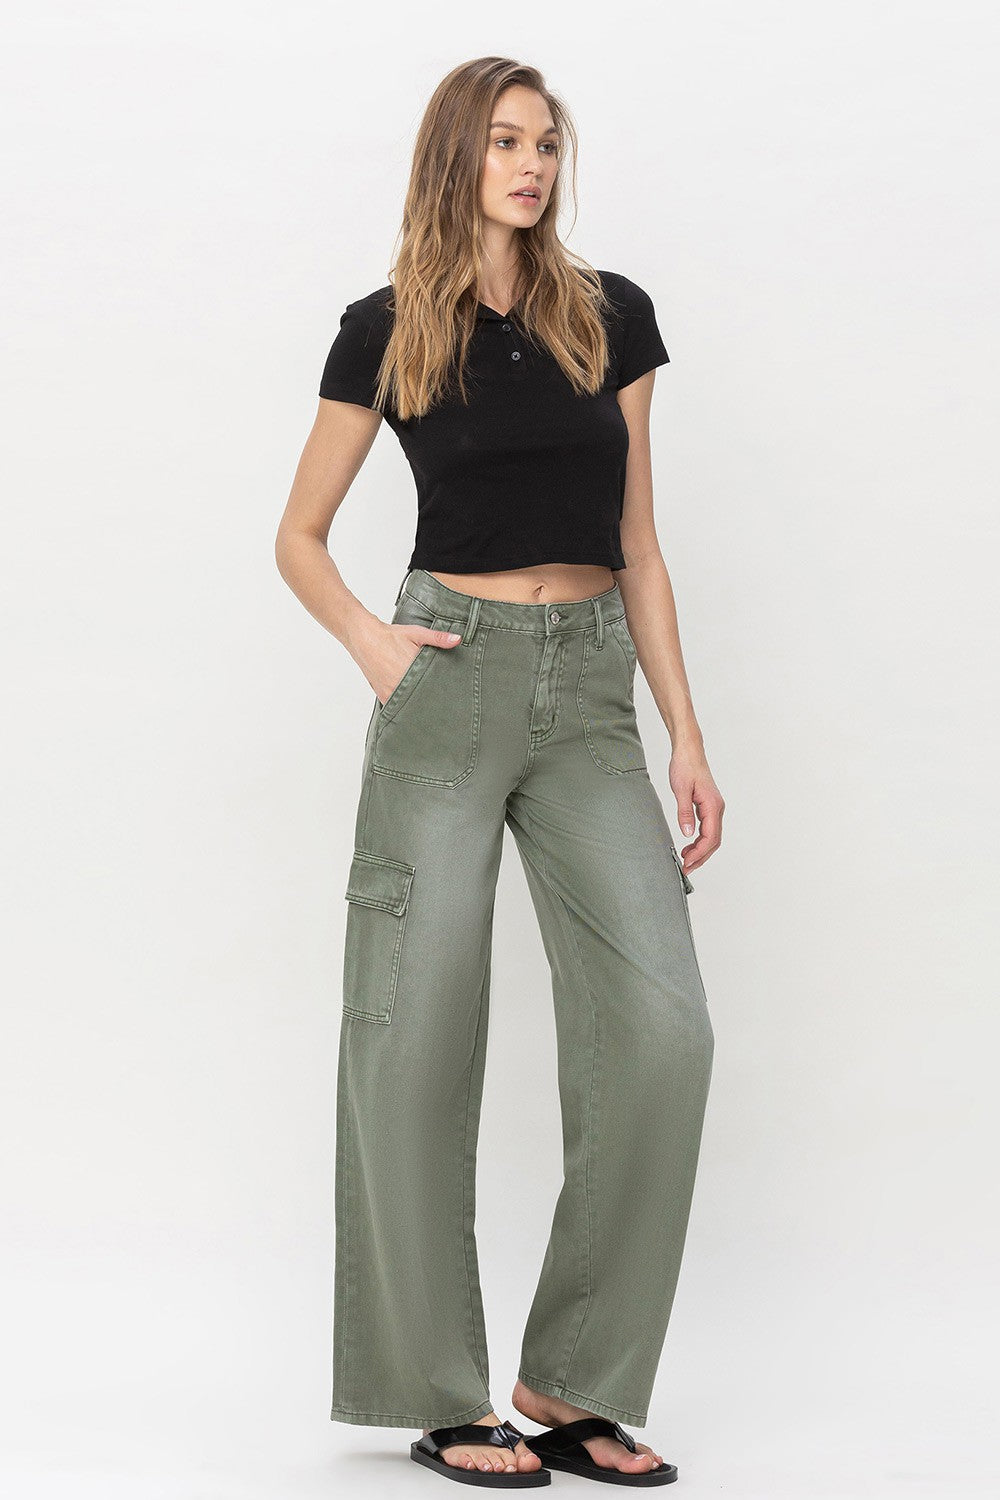 Fashioned For Living: distressed skinny jeans with olive utility